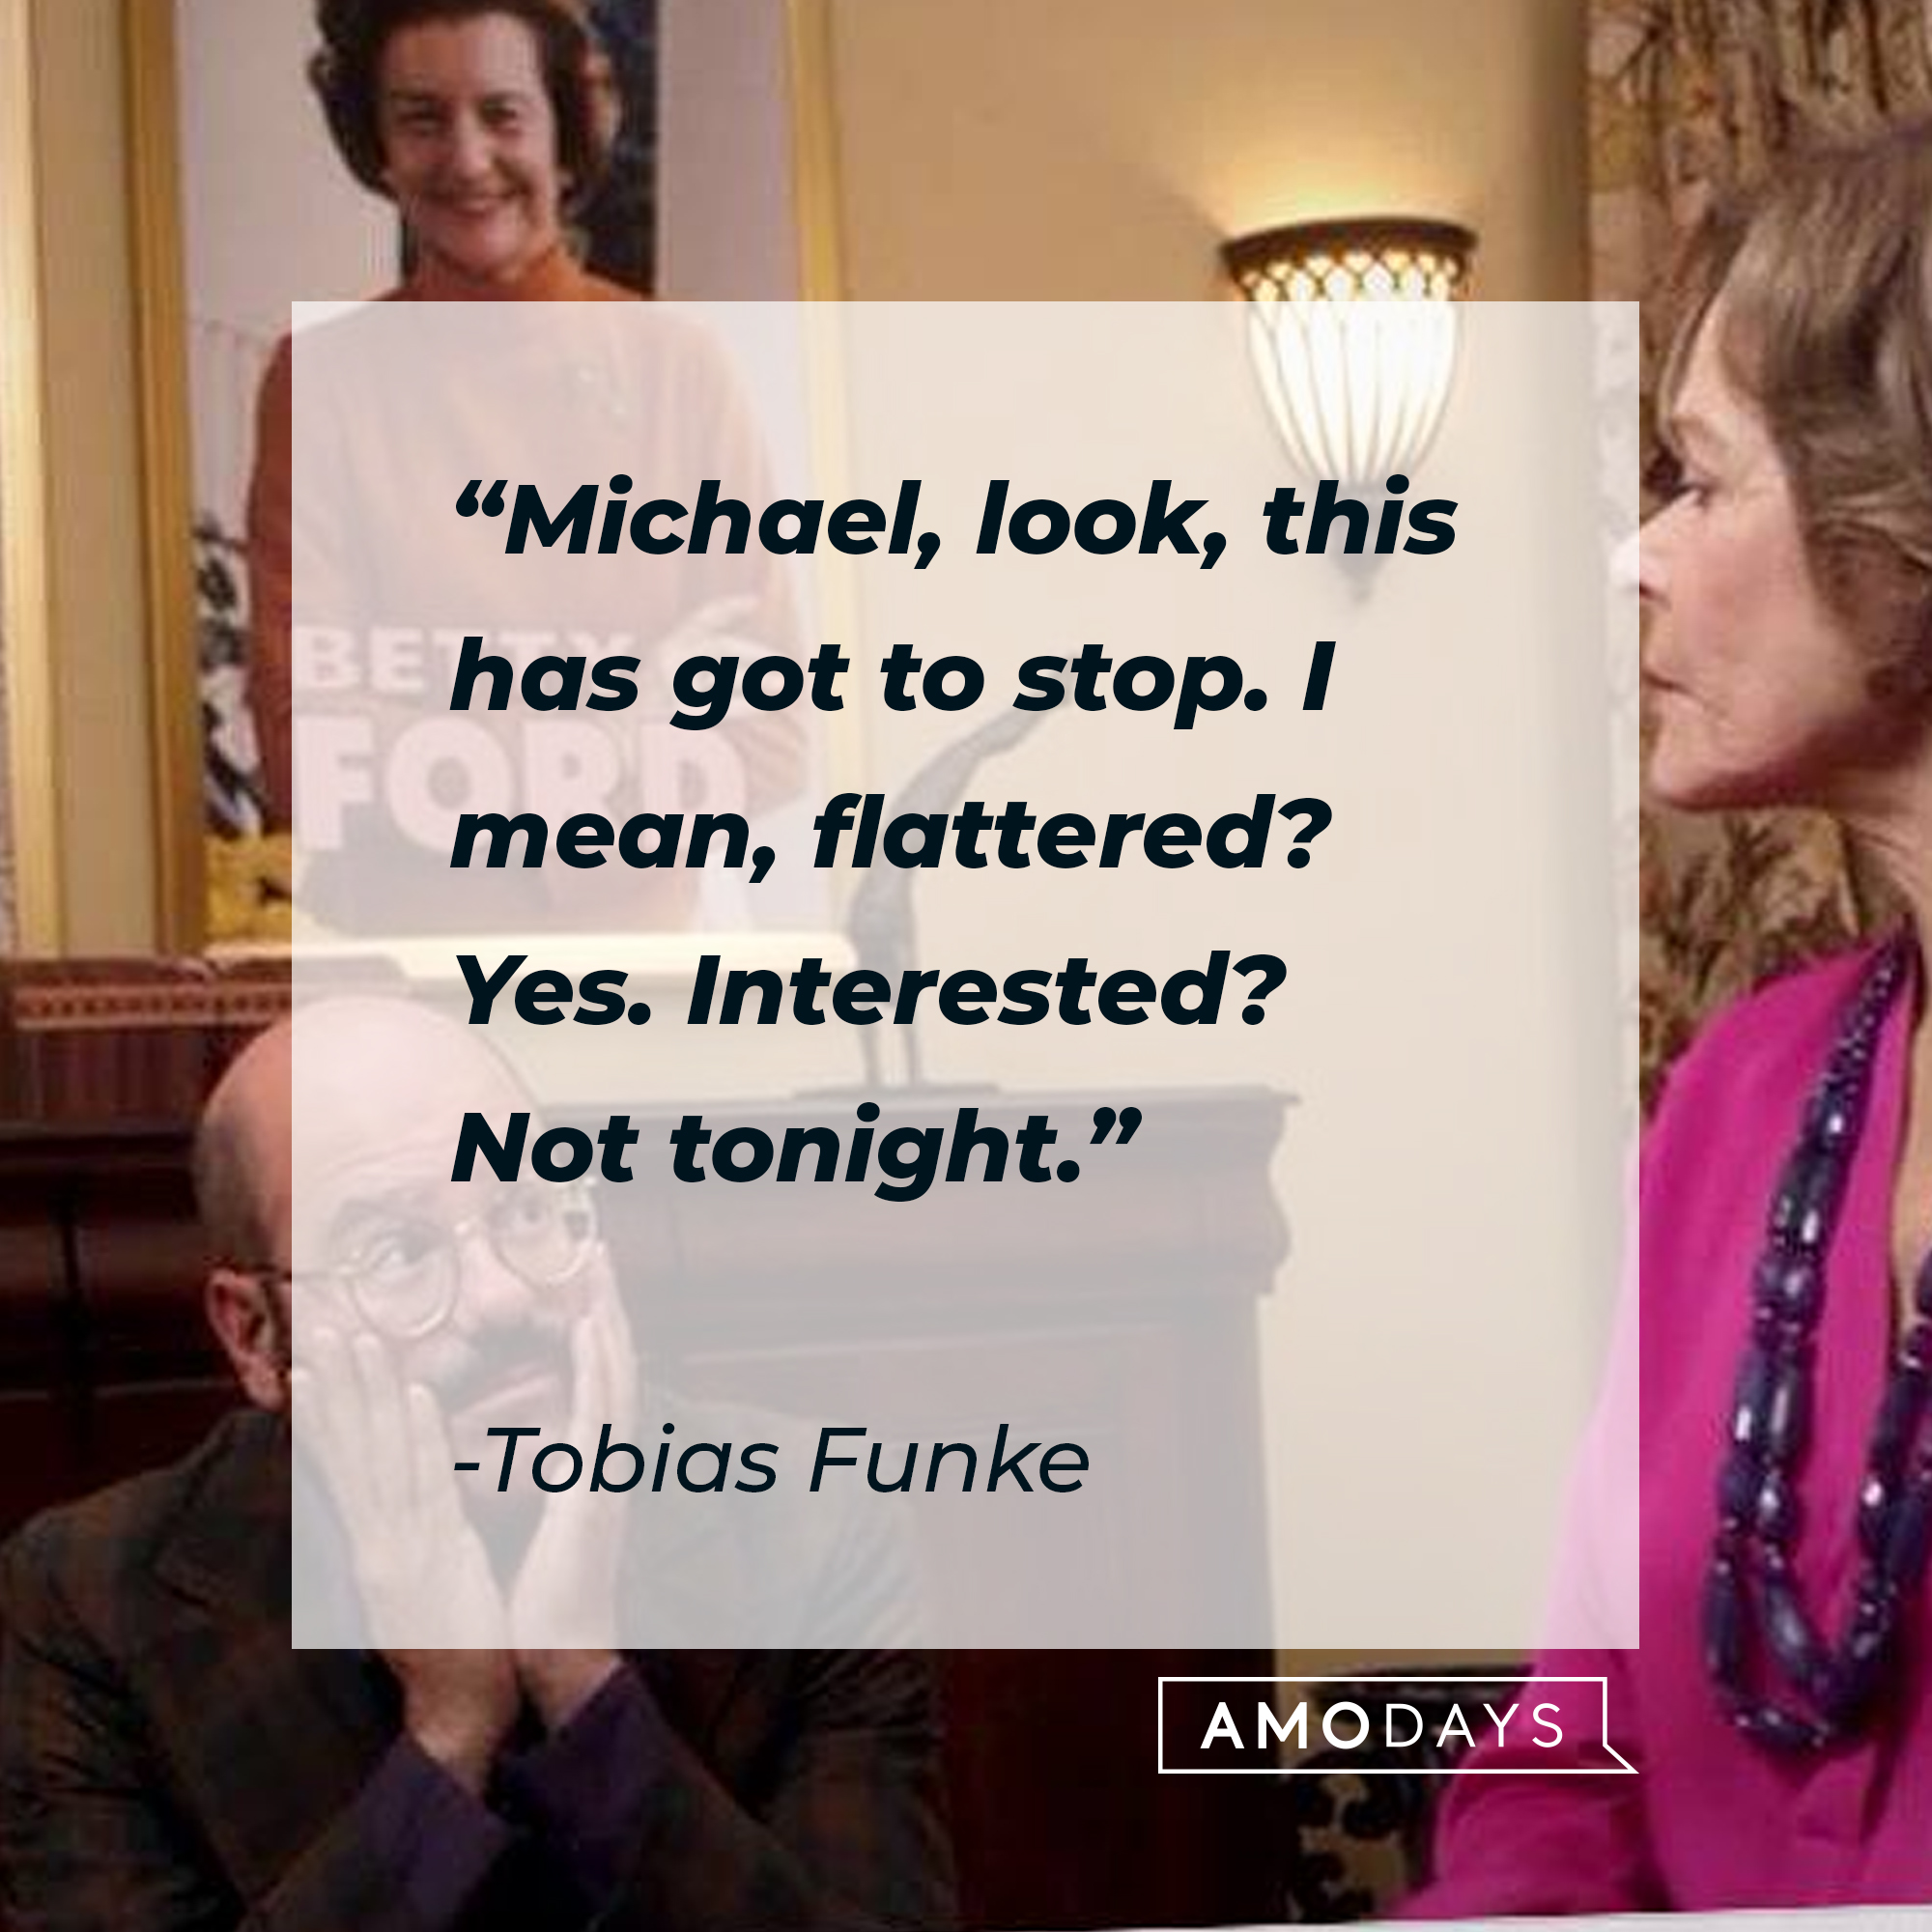 Tobias Funke's quote: "Michael, look, this has got to stop. I mean, flattered? Yes. Interested? Not tonight." | Source: Facebook.com/ArrestedDevelopment